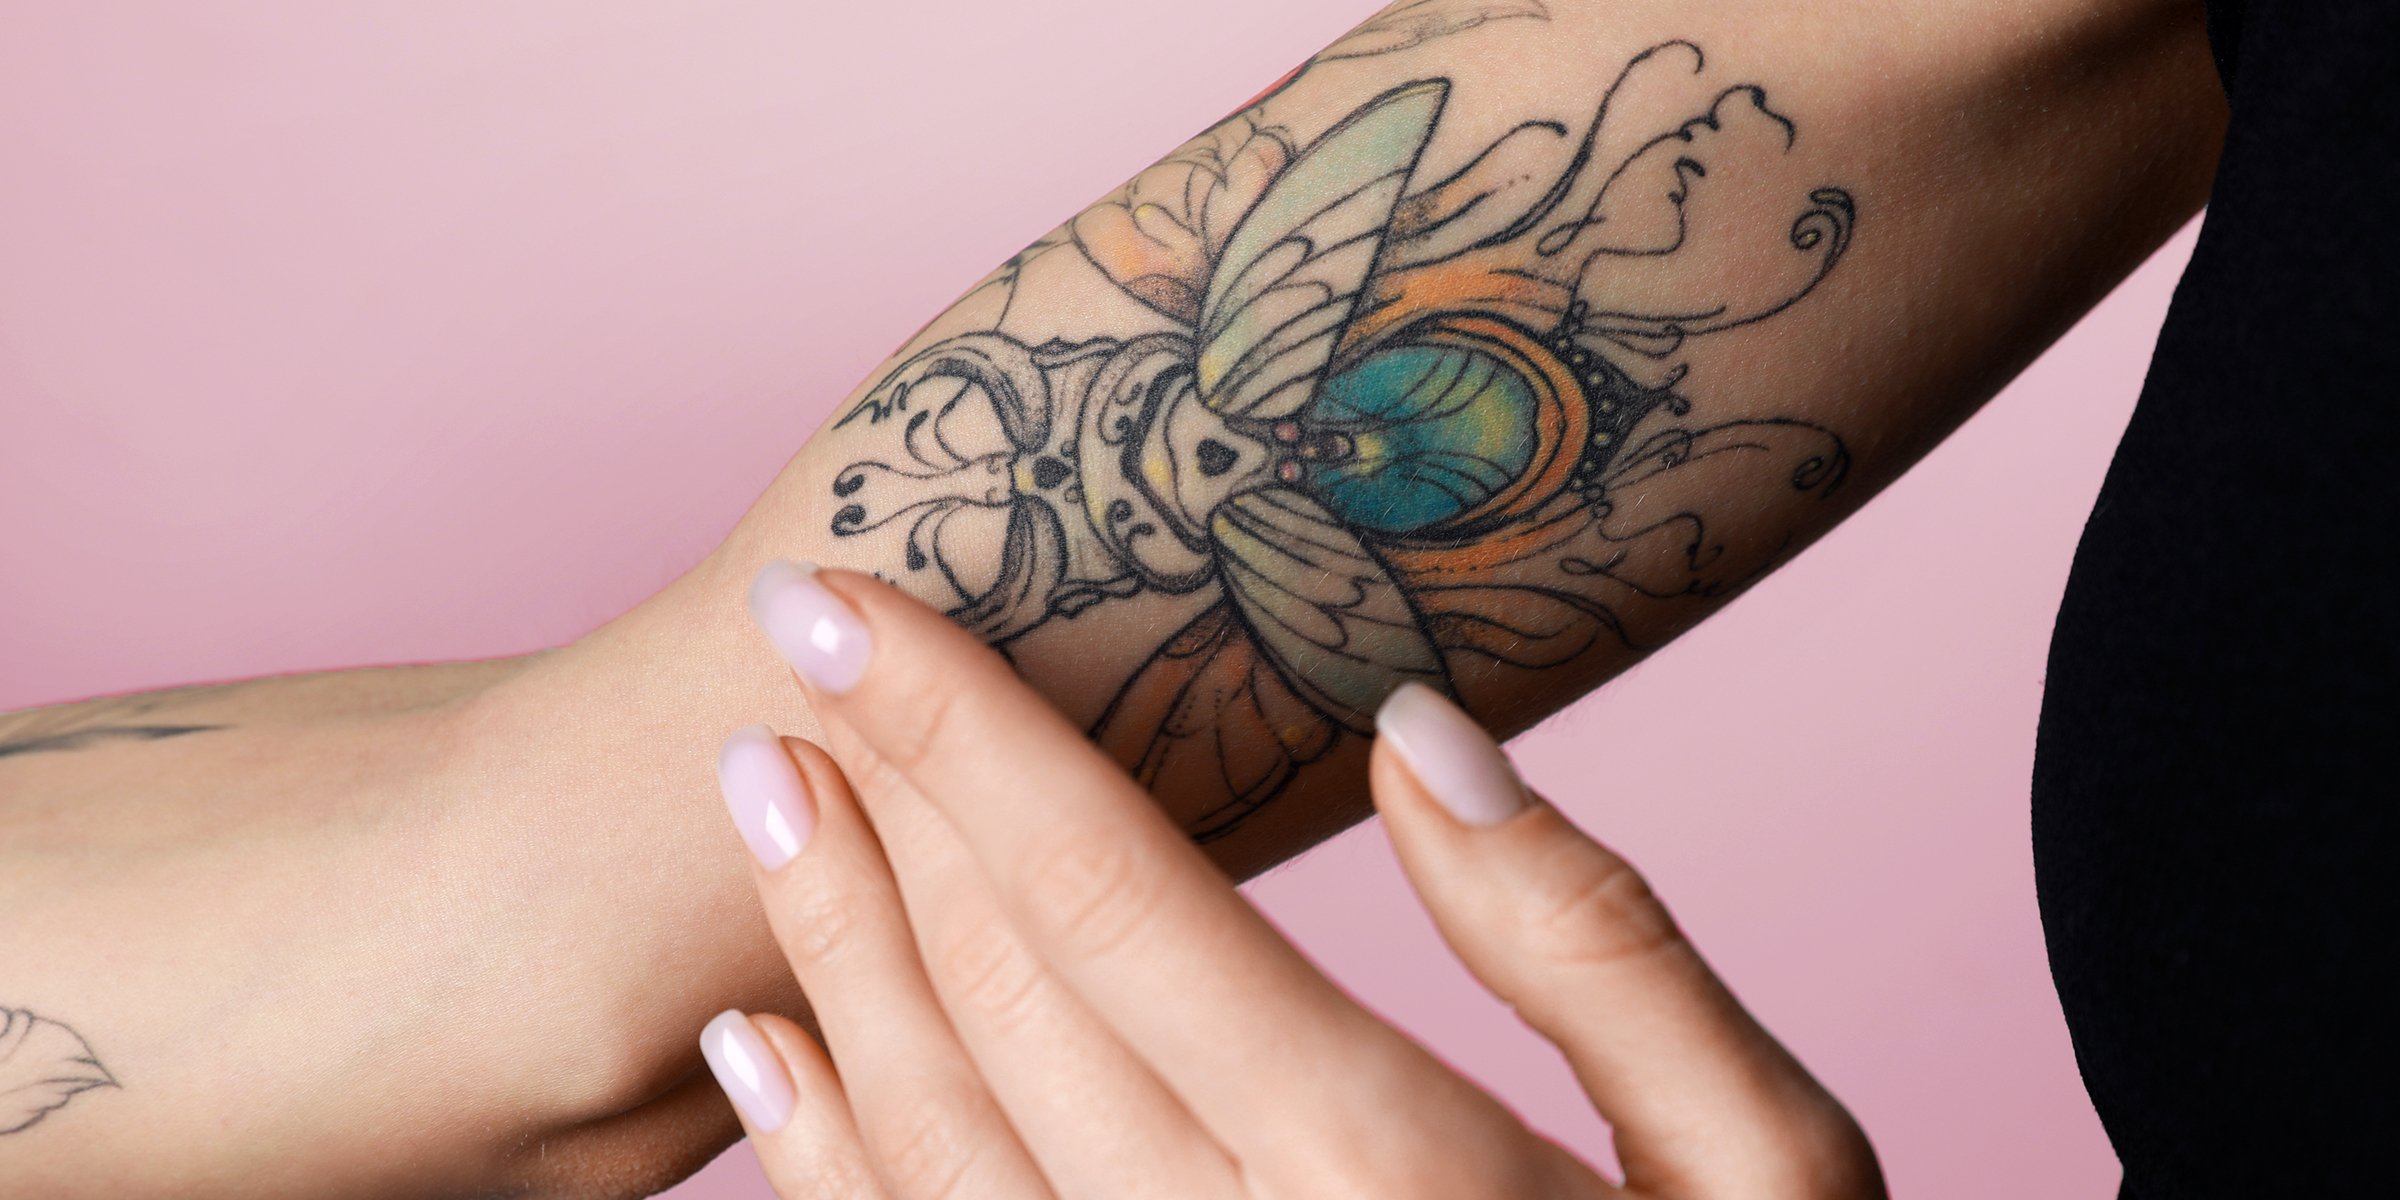 Woman's tattoo on her hand | Source: Shutterstock